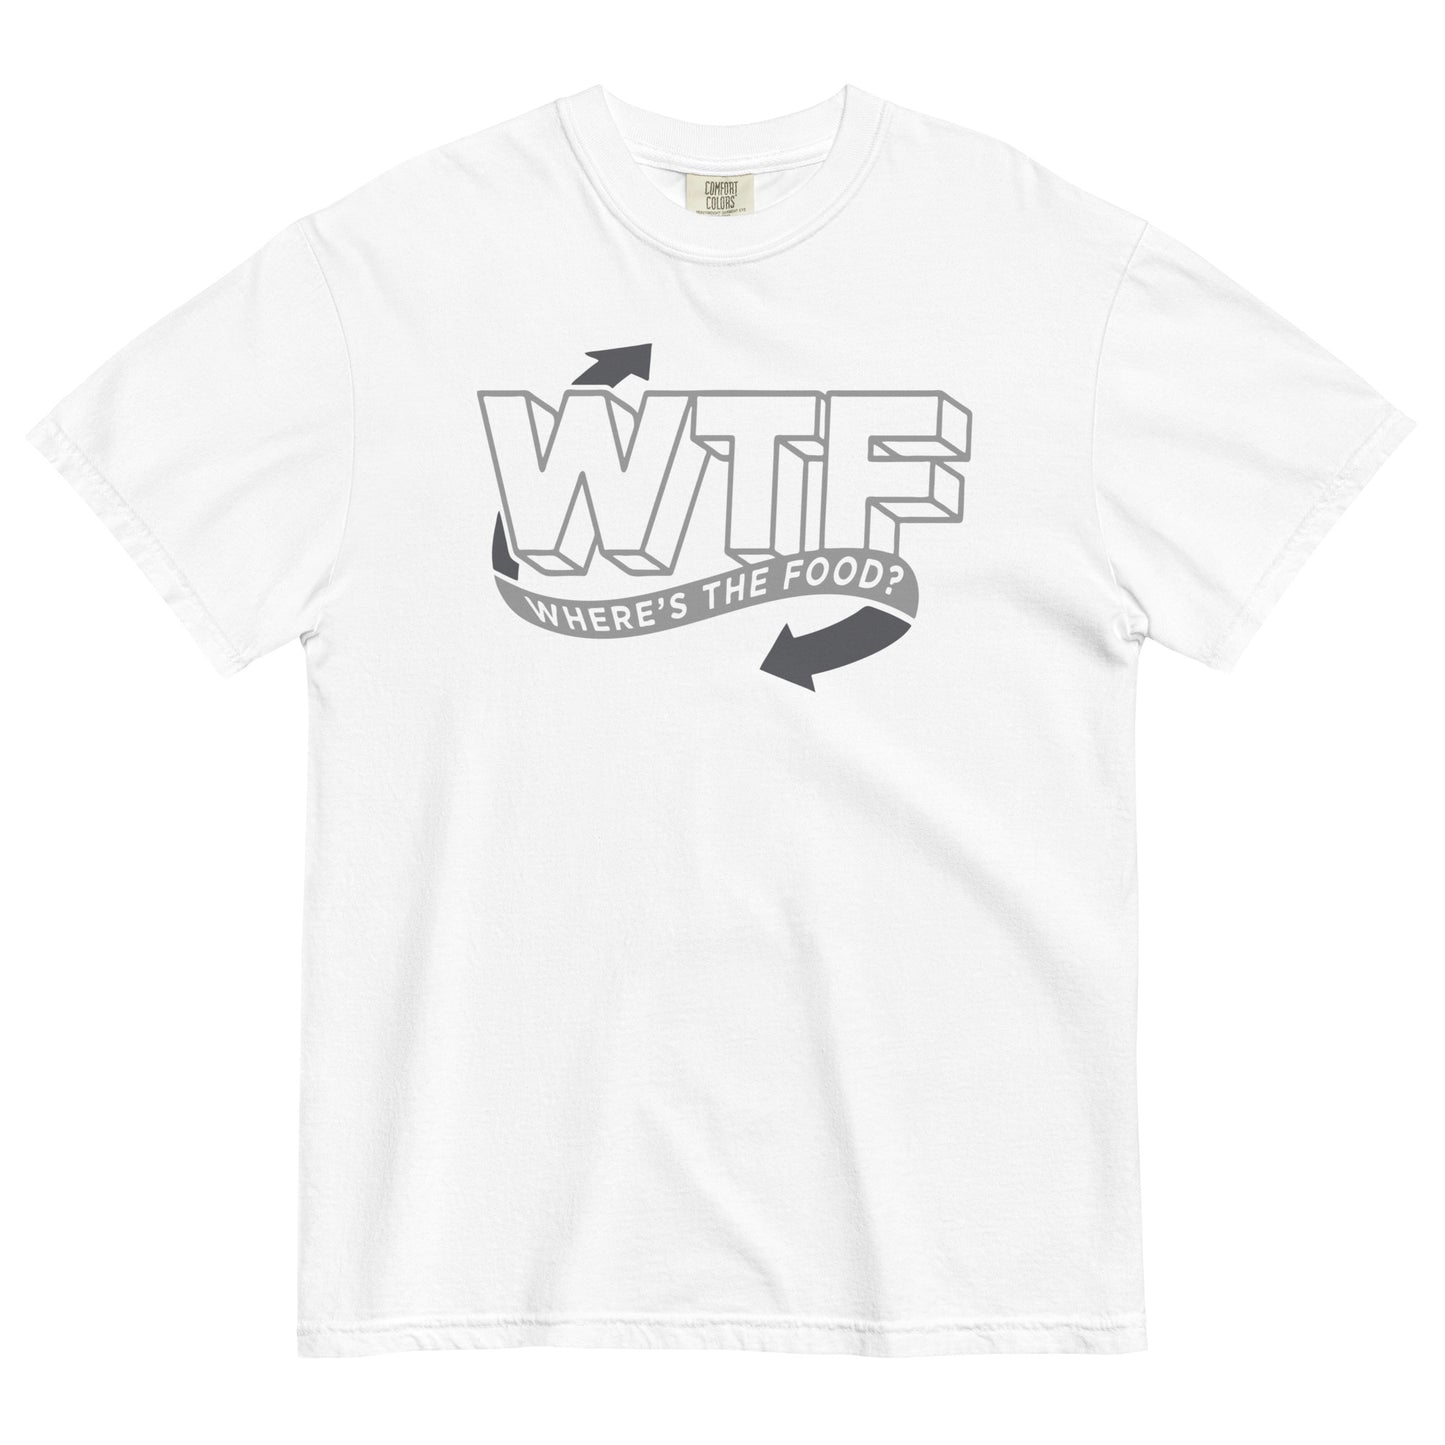 Where's The Food? Men's Relaxed Fit Tee